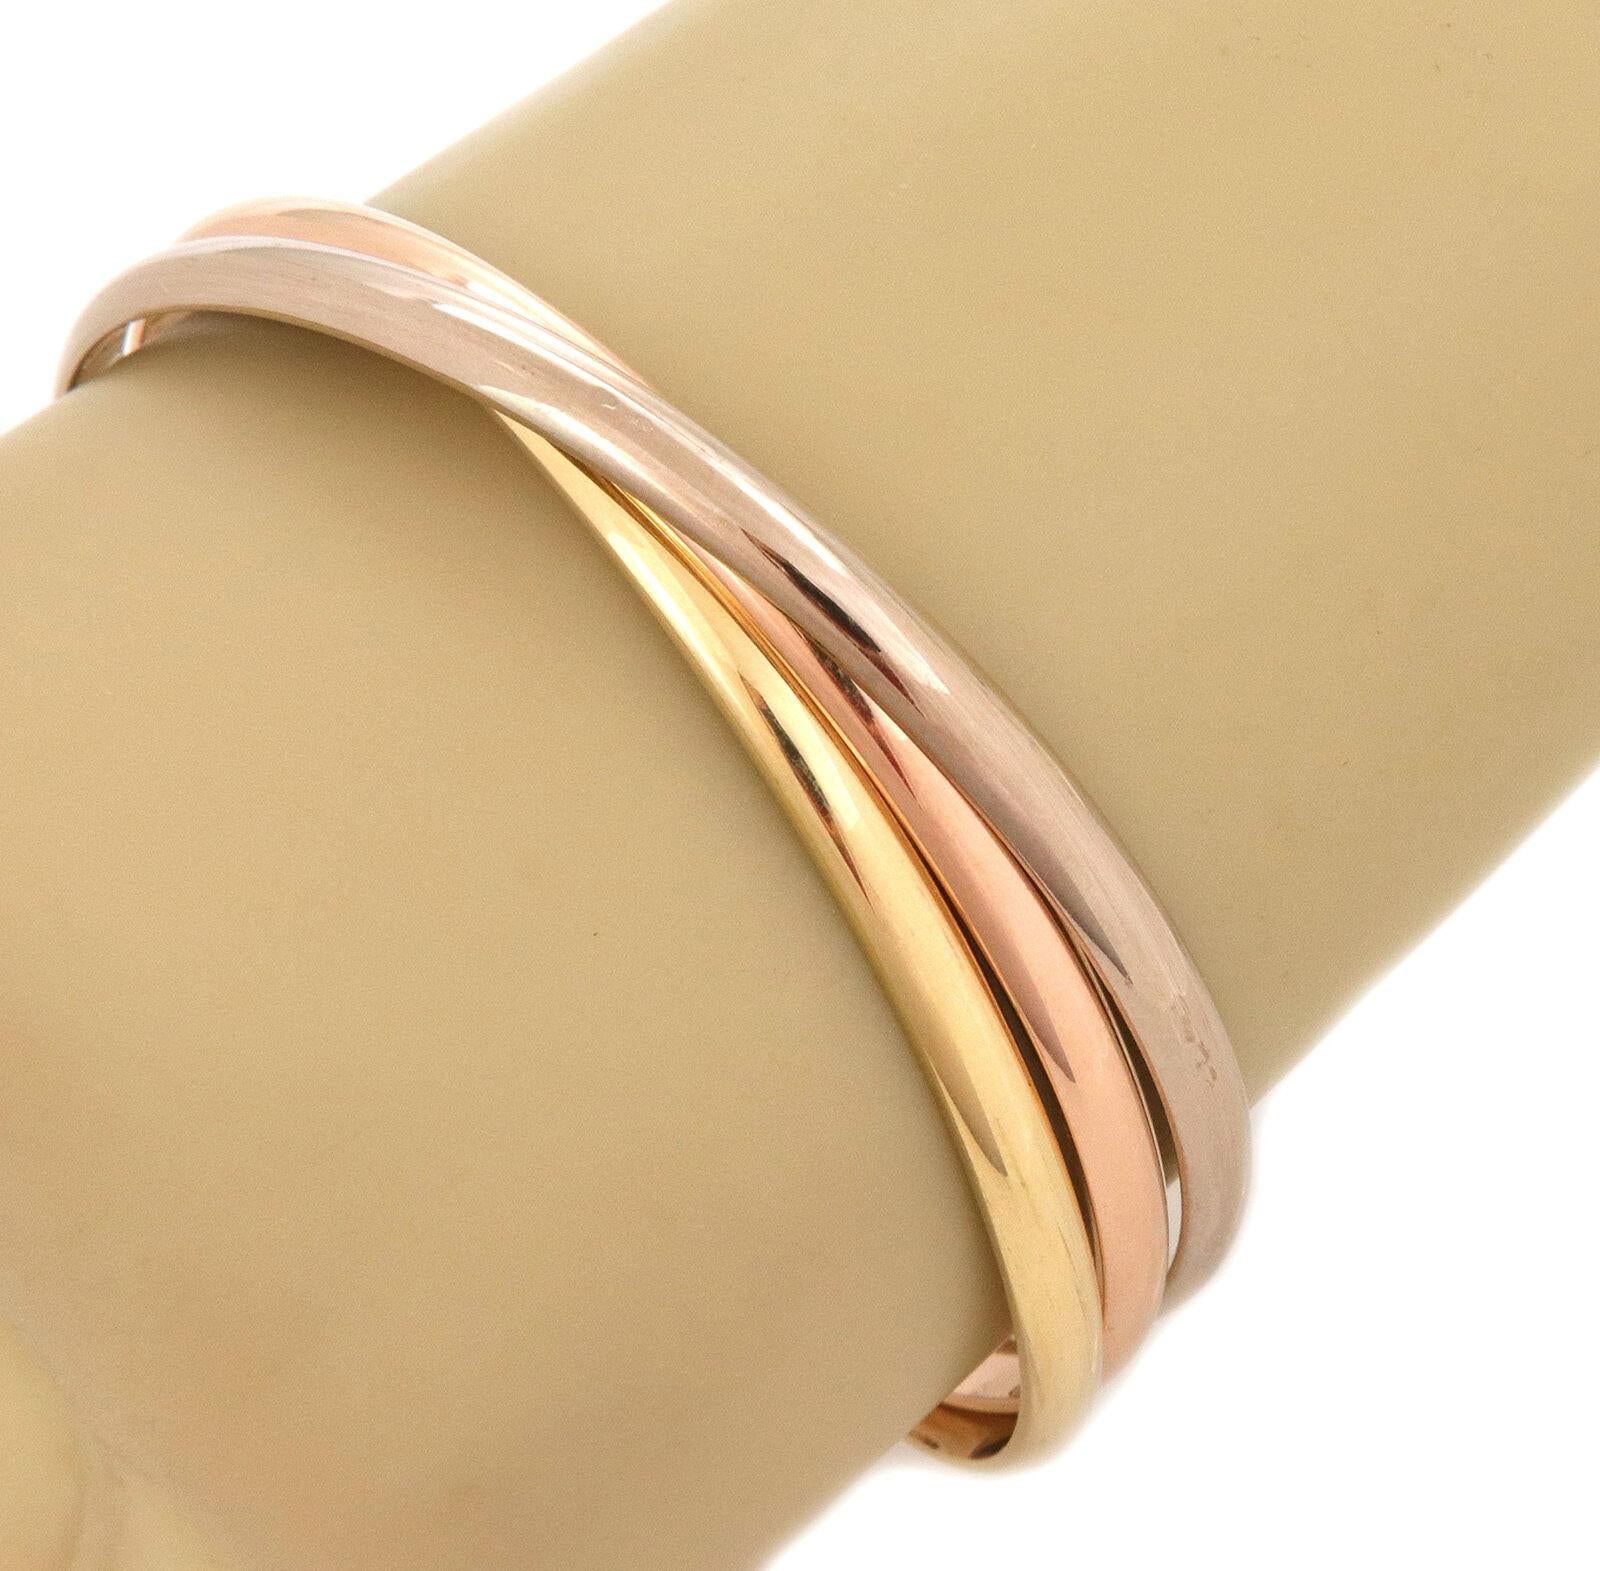 This gorgeous authentic triple interlaced bangles are by Cartier from the Trinity Collection. They are crafted from 18k pink, white and yellow gold respectively in a fine polished finish.  each bangle is 4.5mm wide with a dome shape. They are set in